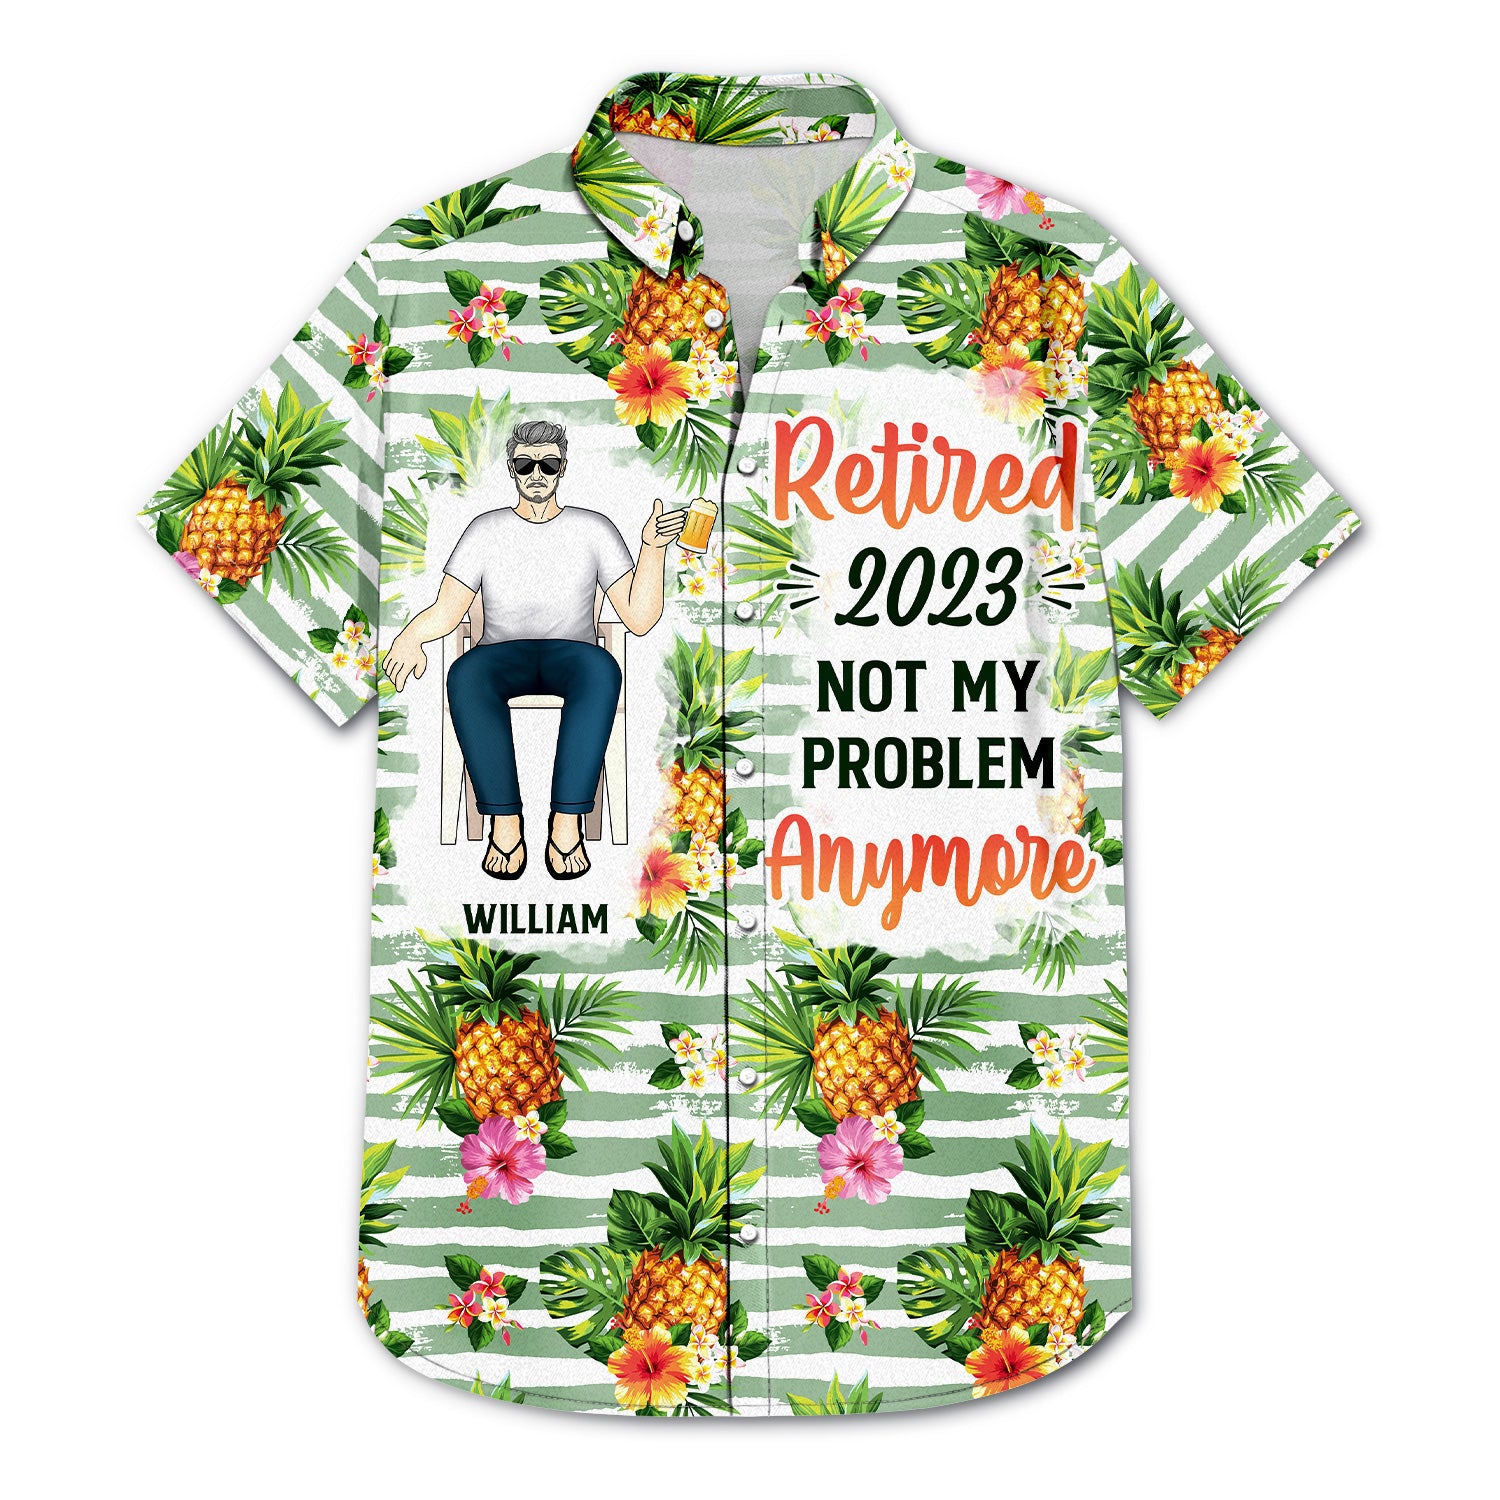 Retired Not My Problem Anymore - Gift For Parents, Grandparents, Retired, Retirement Gift - Personalized Custom Hawaiian Shirt